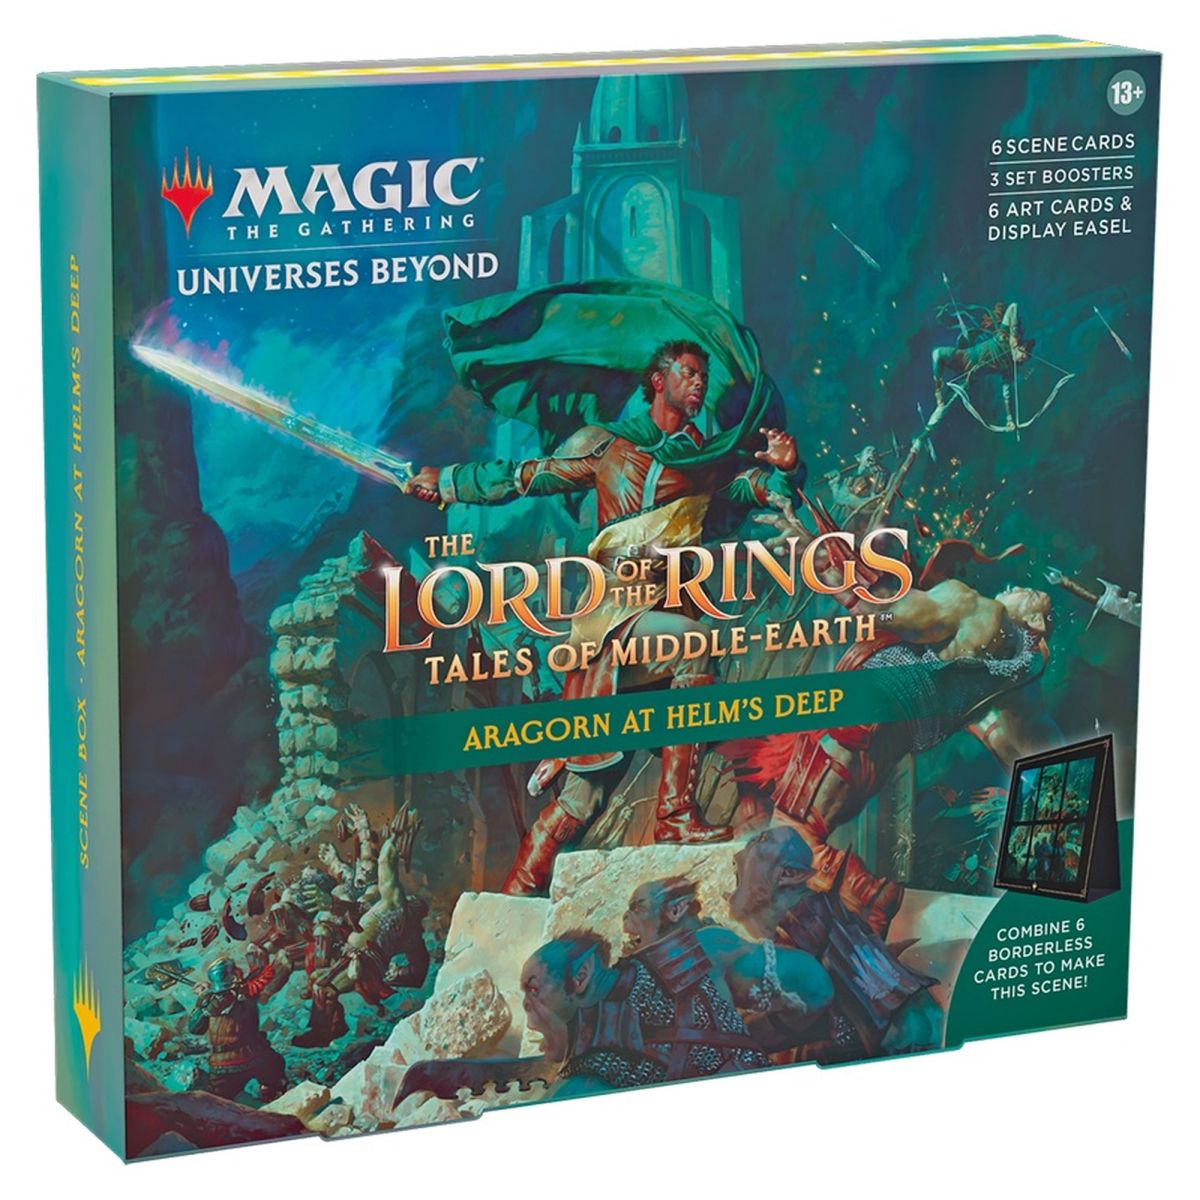 Item Magic The Gathering - Scene Box - The Lord of the Rings: Tales of Middle-earth - Aragorn At Helm's Deep - EN